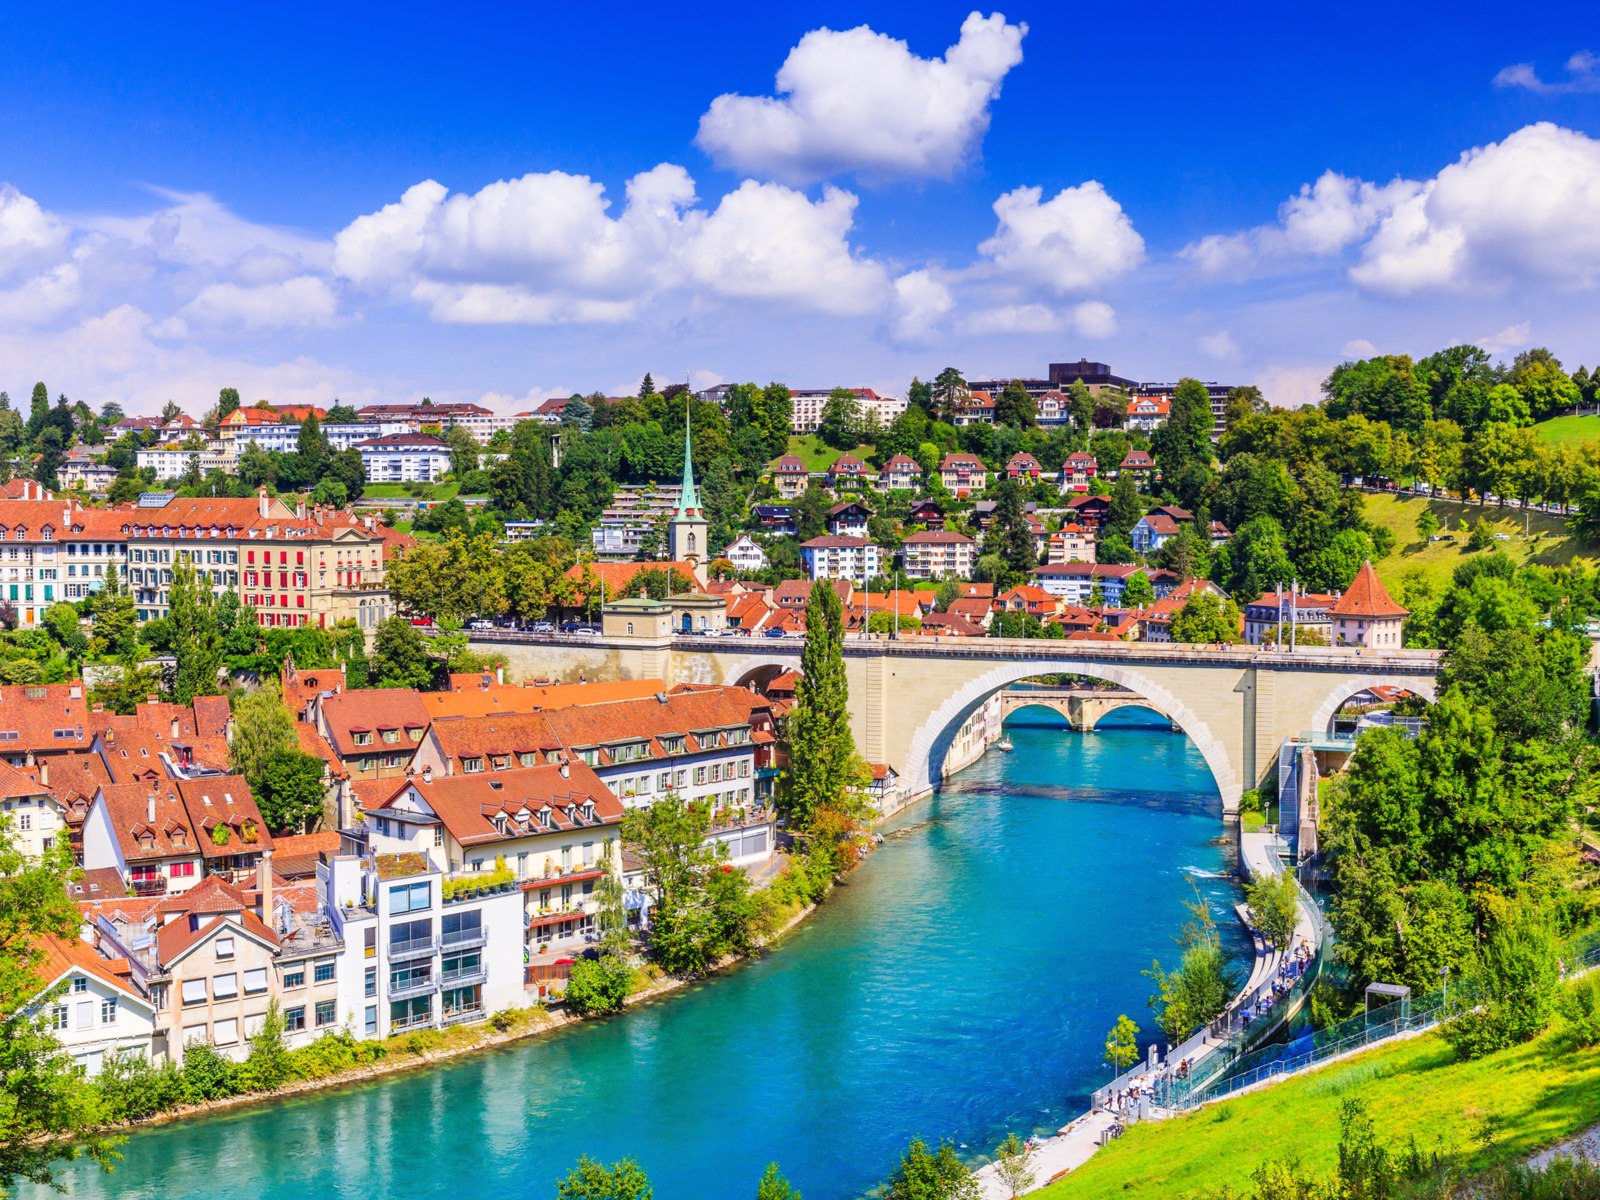 Bern, an old city center with a stone bridge and homes along the river, for a piece on the best time to go to Switzerland